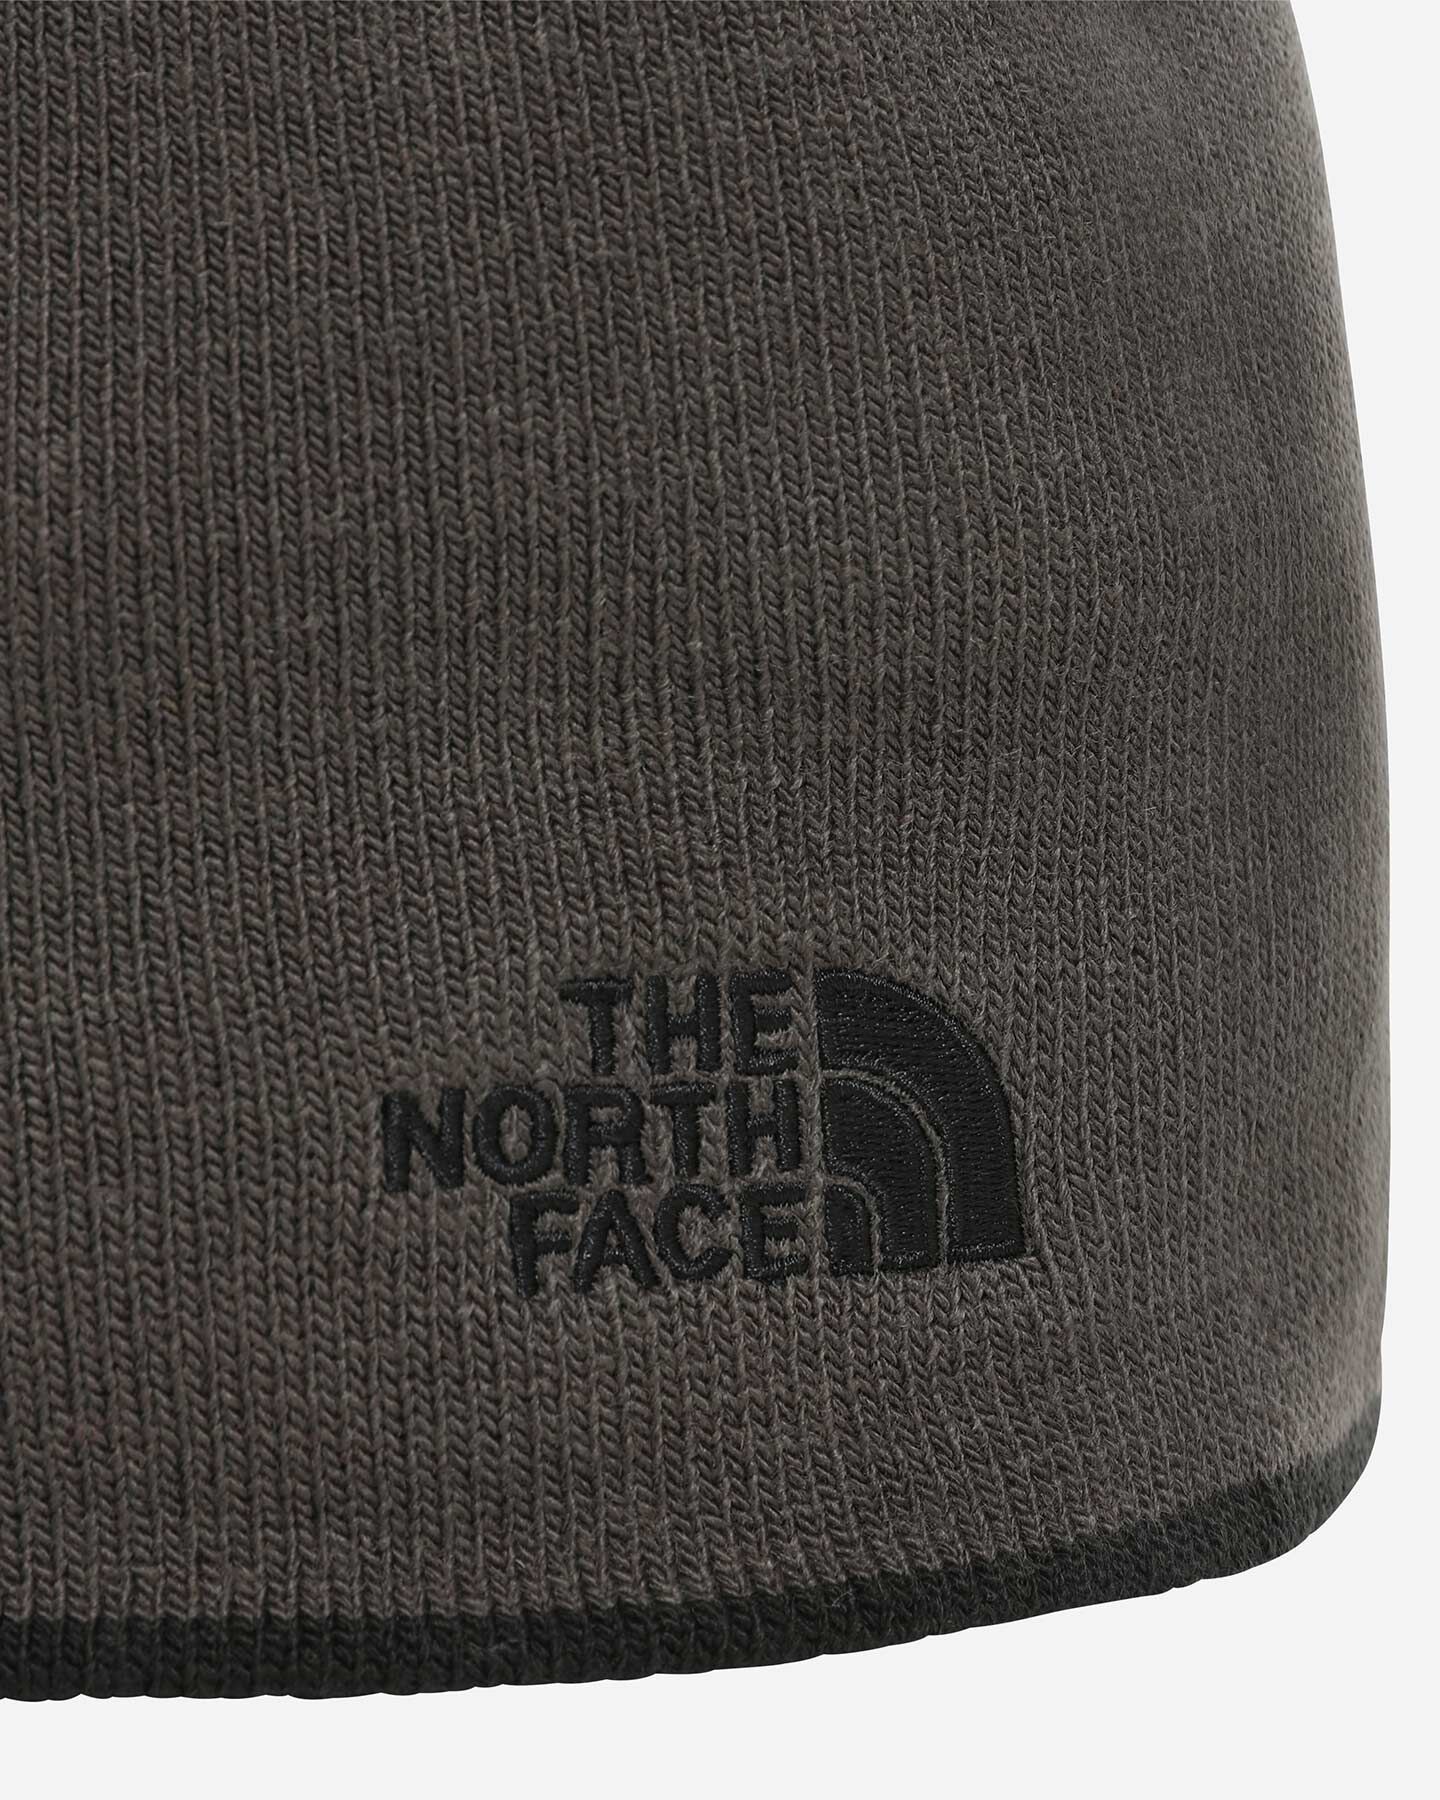  Berretto THE NORTH FACE BANNER DOUBLE-FACE S5123326|G92|OS scatto 2